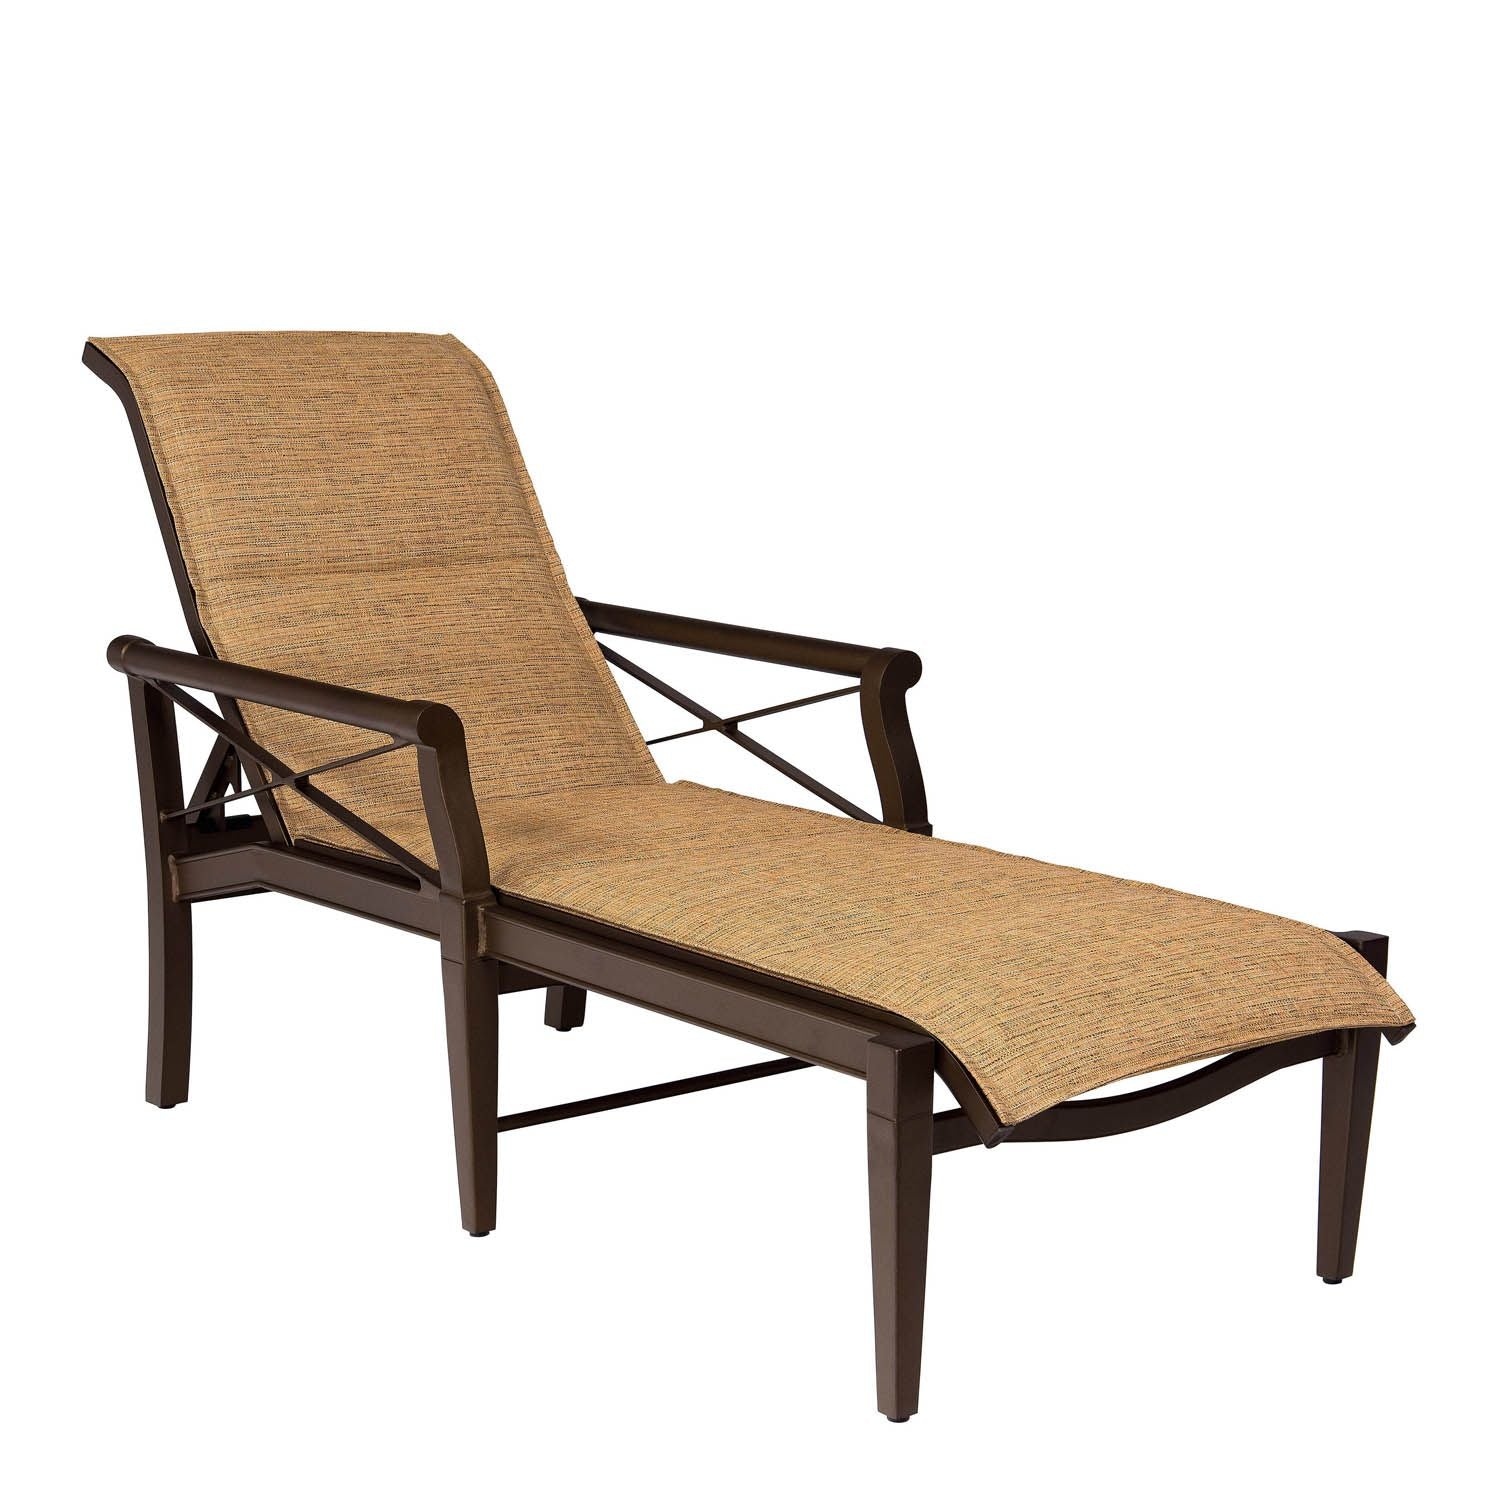 Andover padded Sling adjustable chaise lounge by Woodard